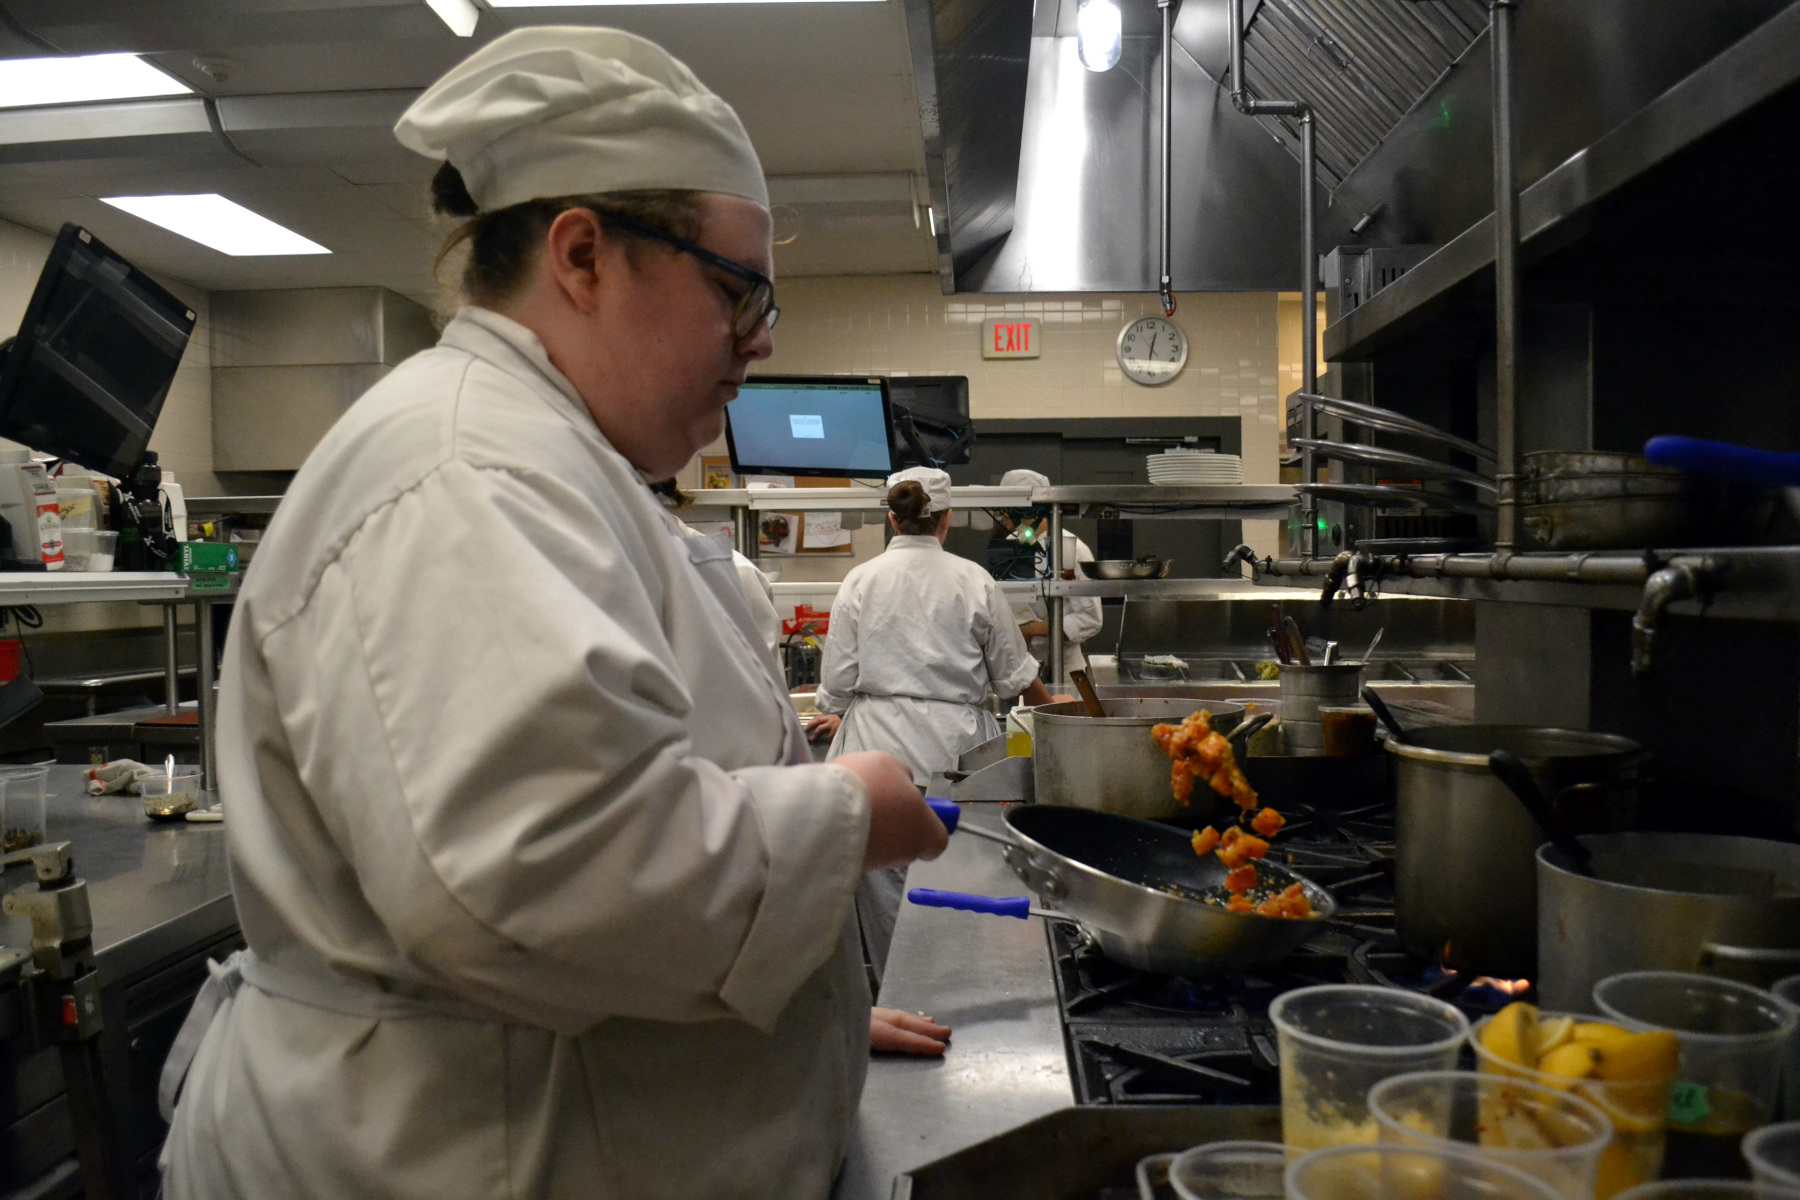 Student cooking pasta in Culinary Lab